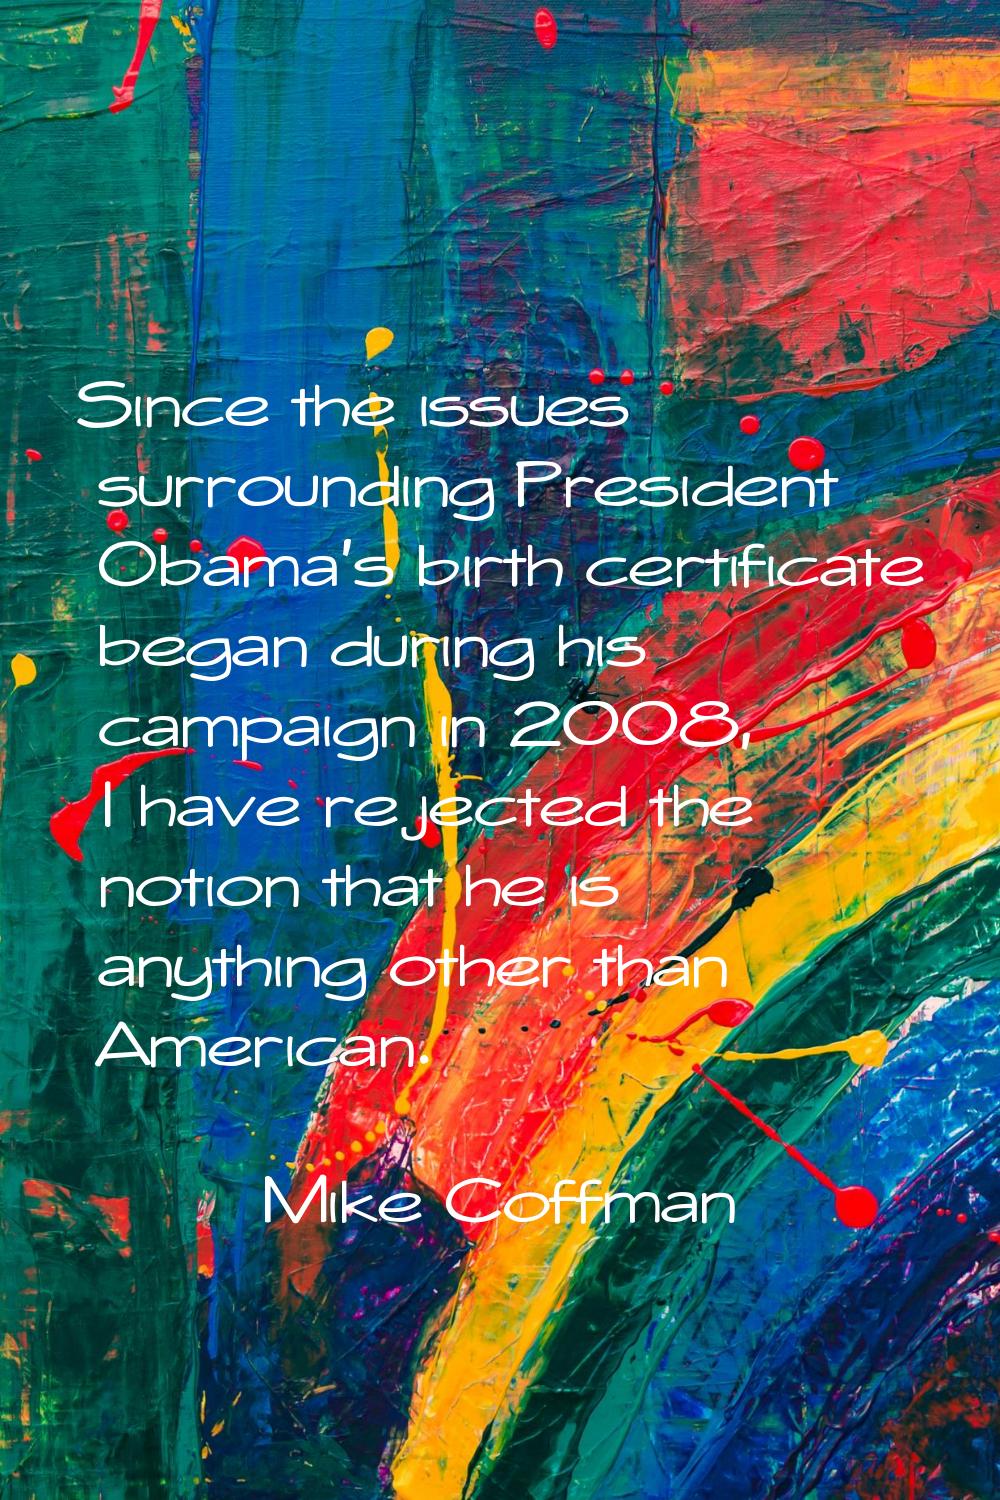 Since the issues surrounding President Obama's birth certificate began during his campaign in 2008,